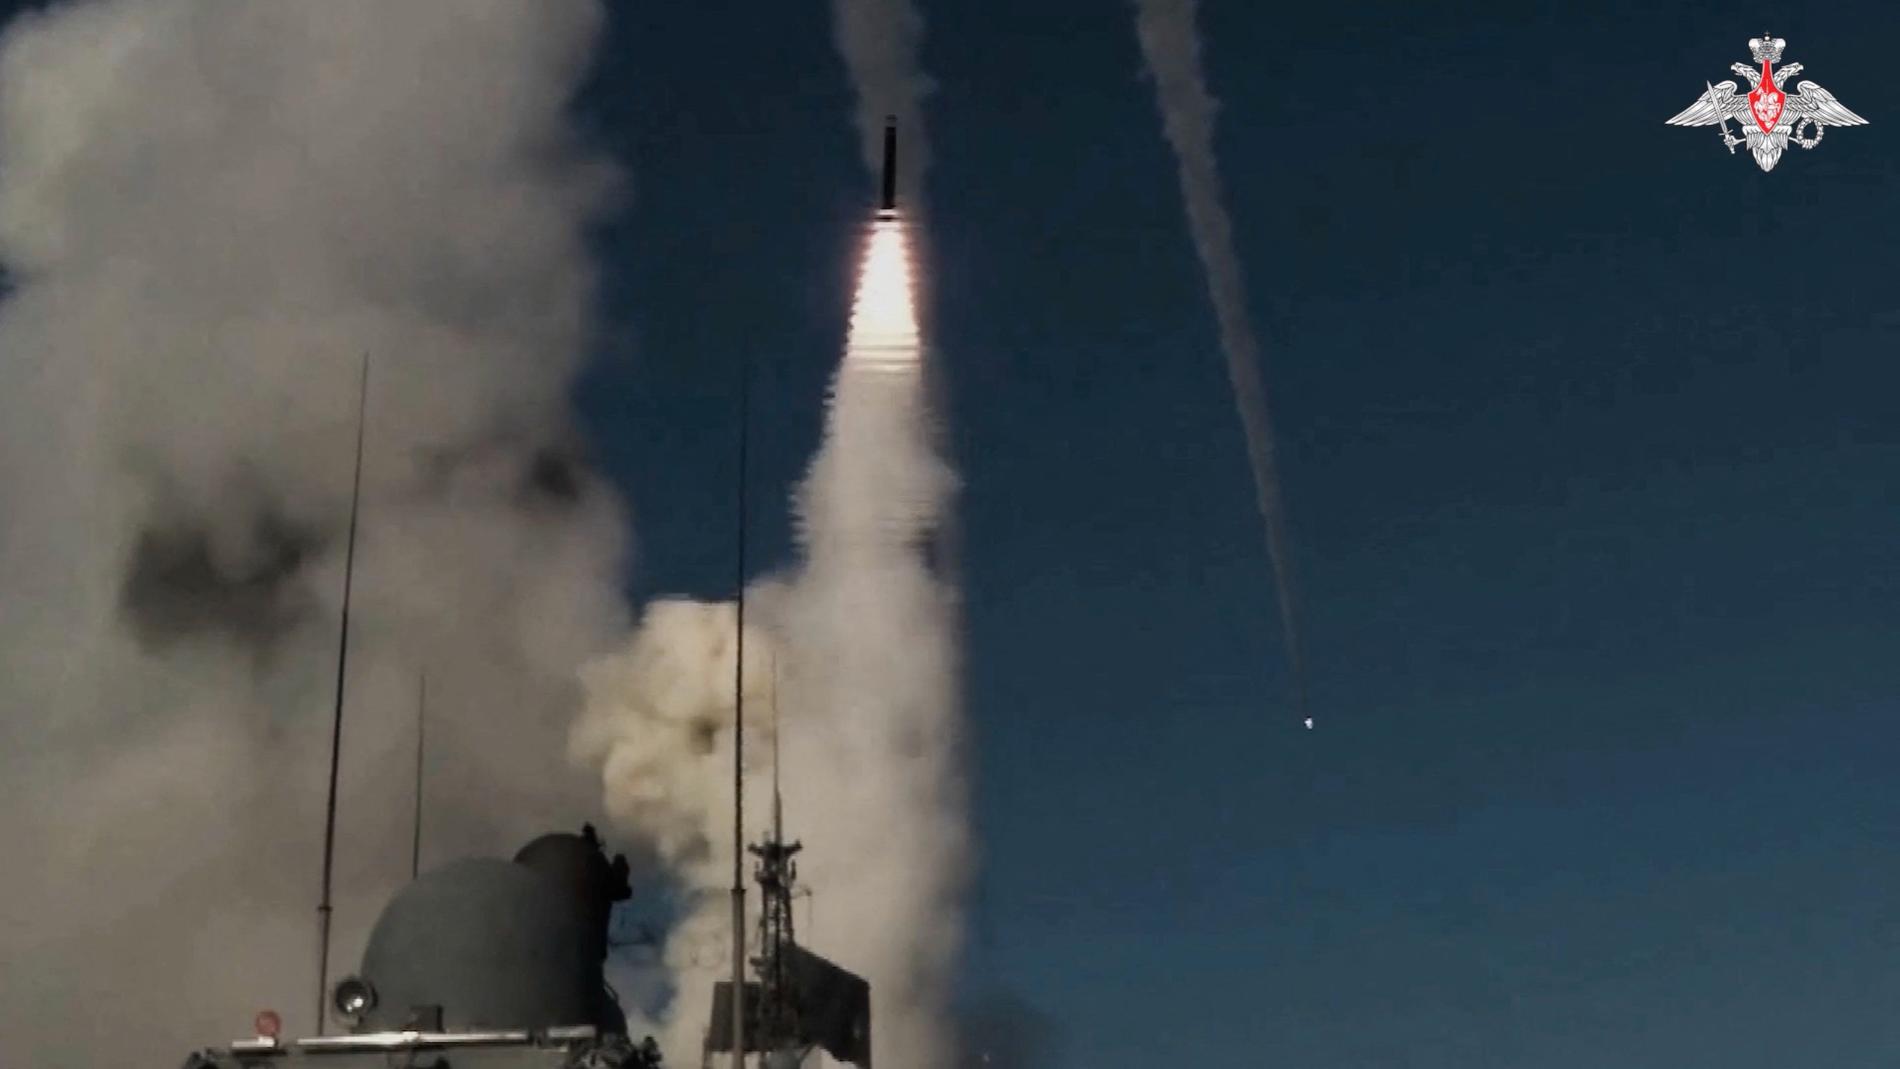 A frigate in the Russian Black Sea Fleet fires a missile at Ukrainian military infrastructure, according to the Russian Ministry of Defense’s comment on this photo published last Wednesday.